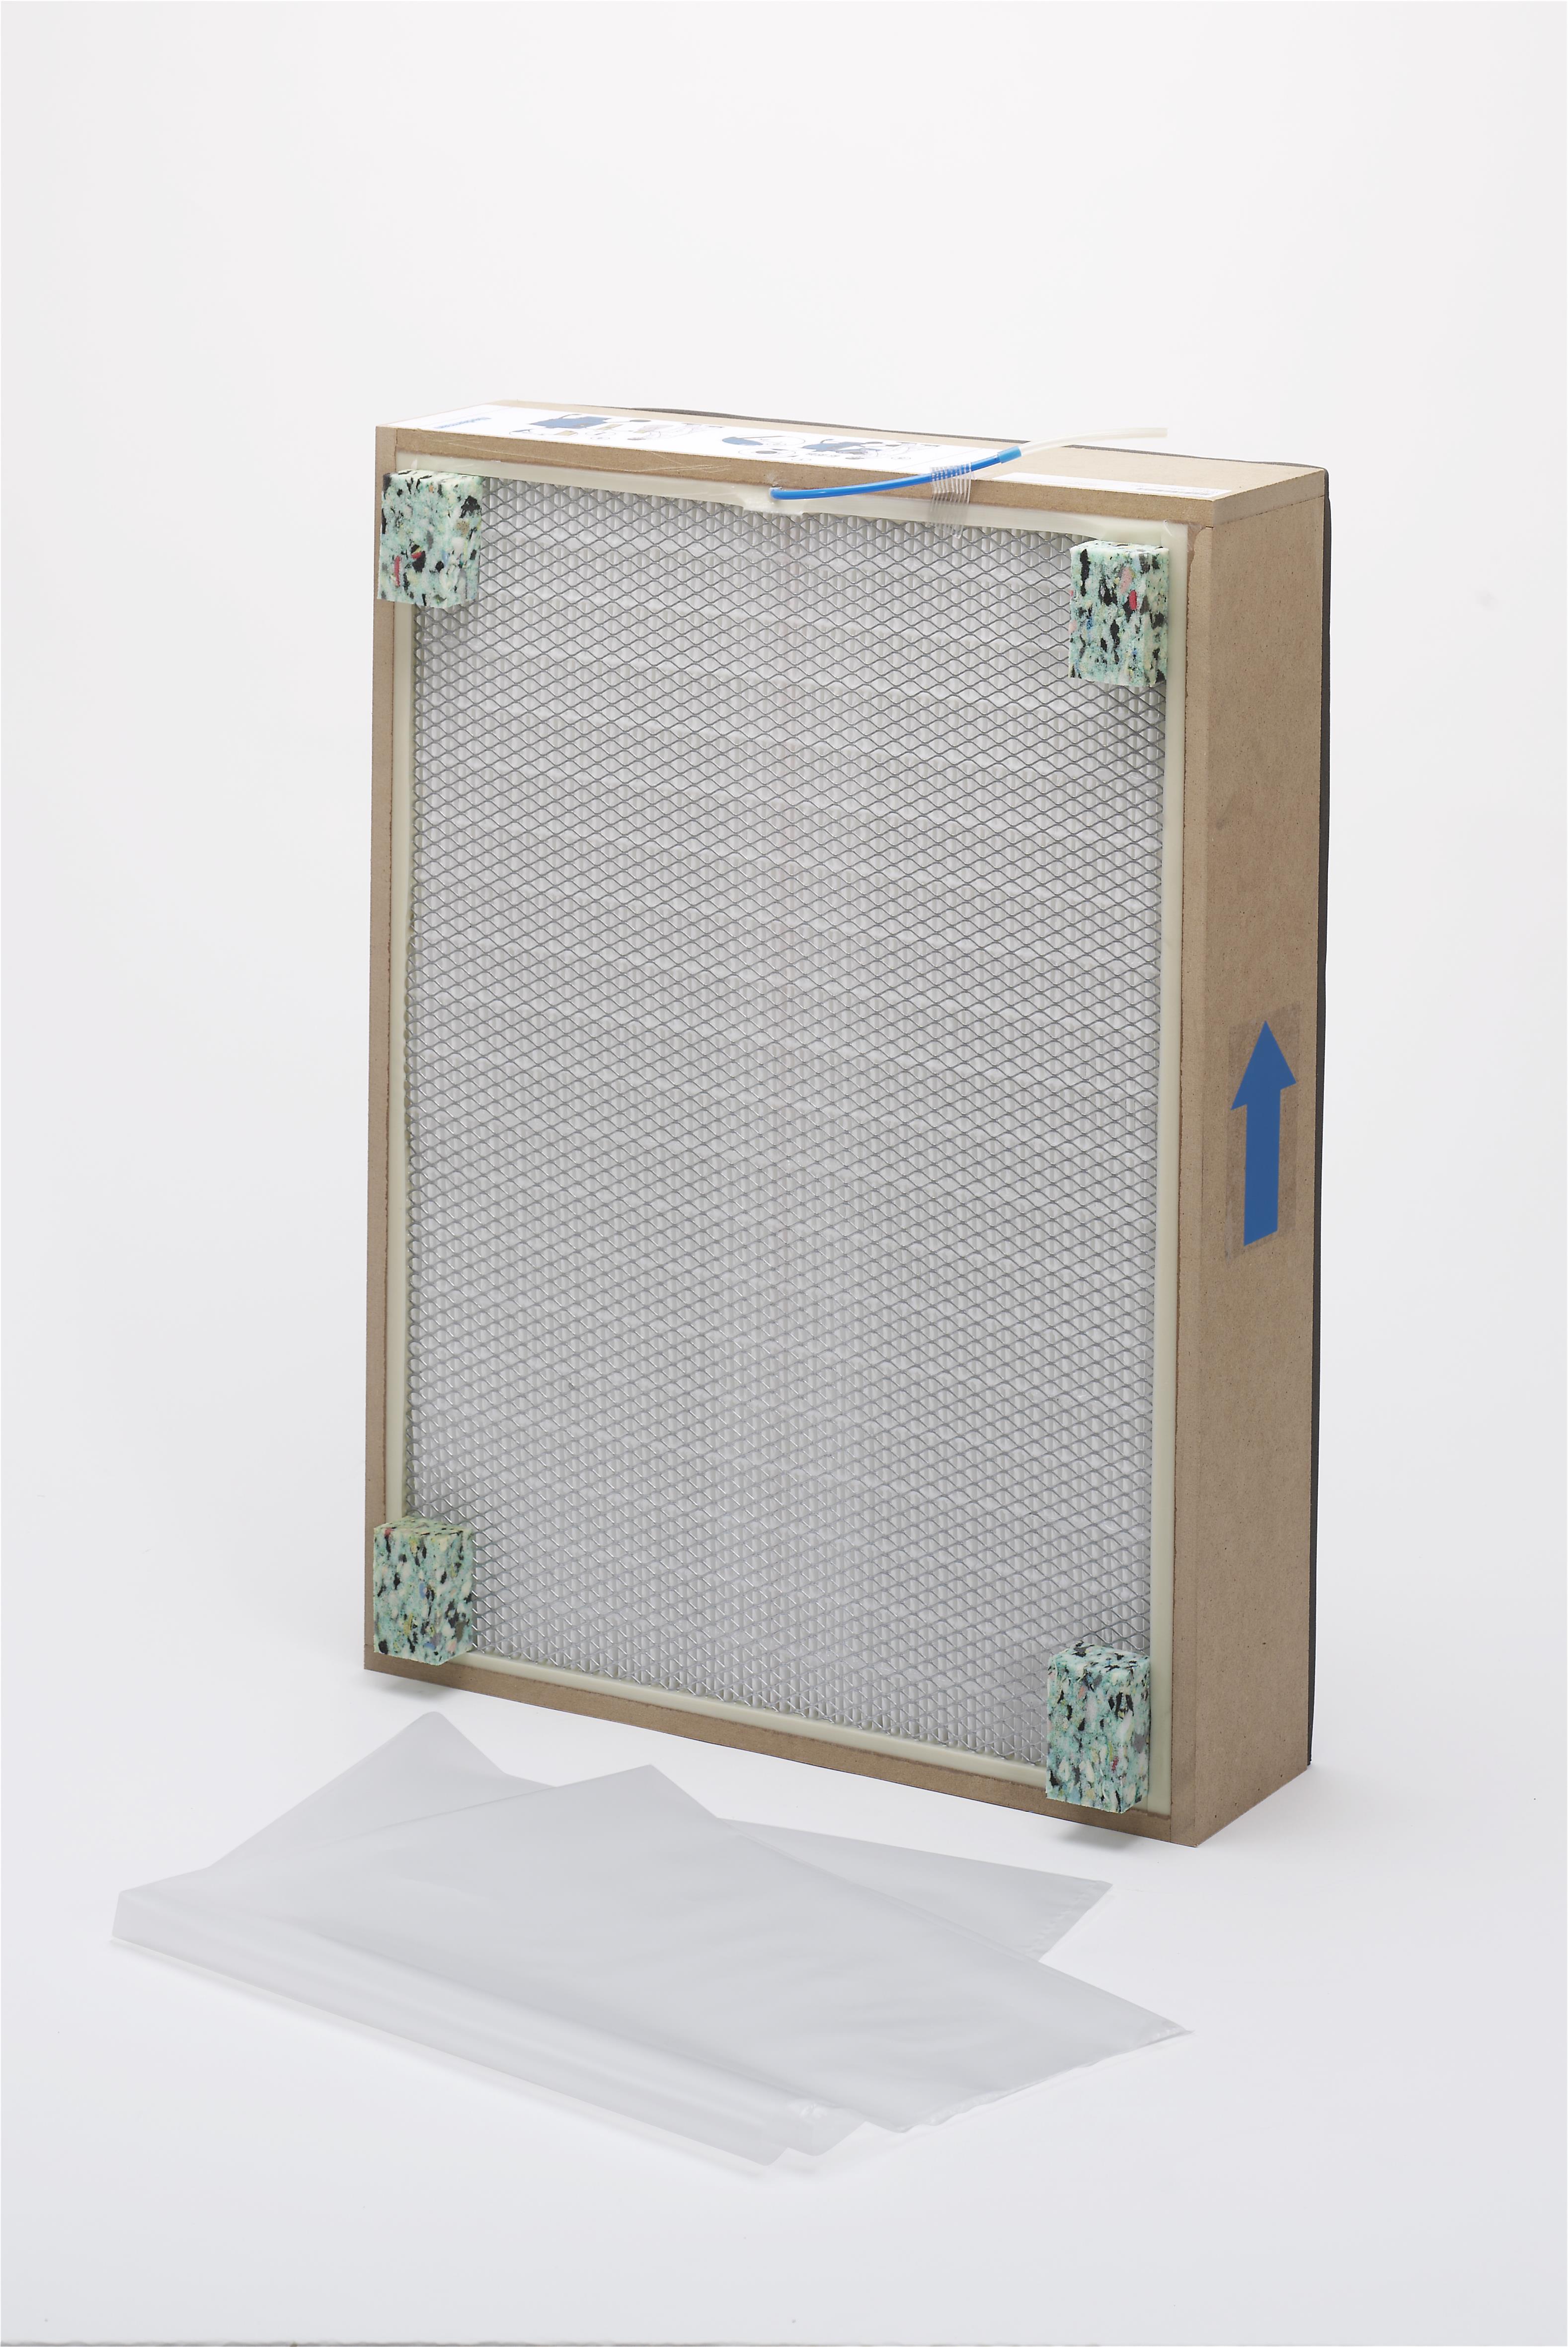 Ultra high efficiency HEPA secondary filter for FilterBox